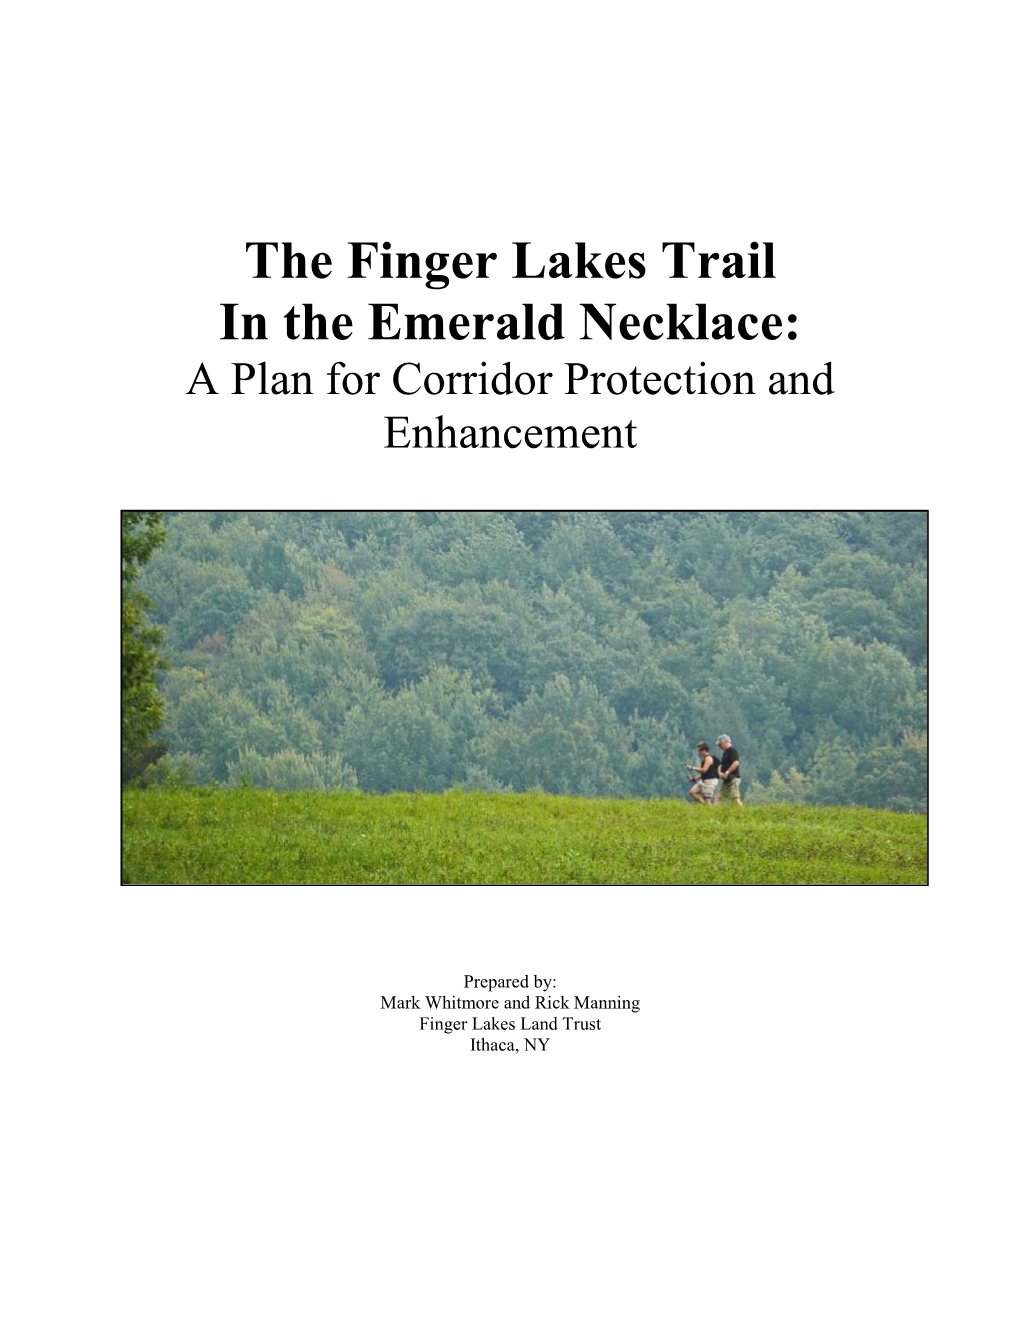 The Finger Lakes Trail in the Emerald Necklace: a Plan for Corridor Protection and Enhancement